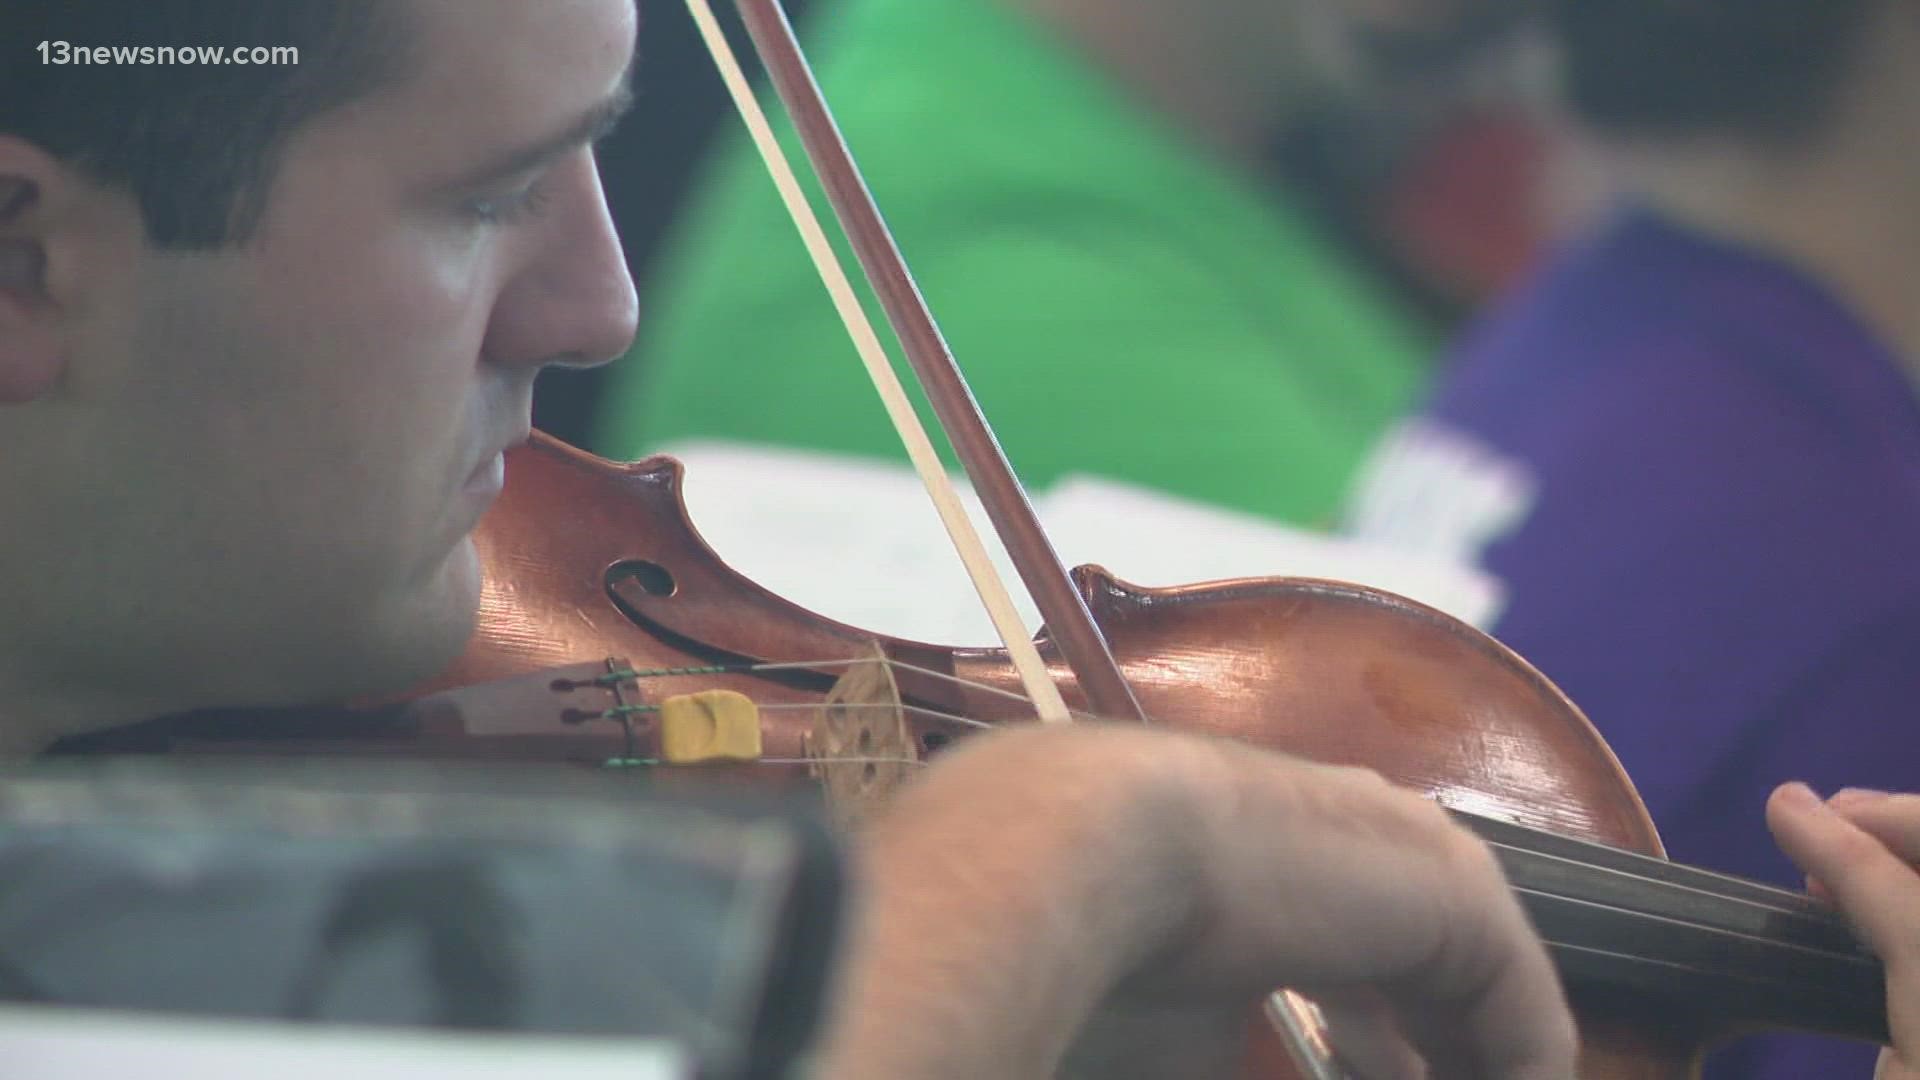 Virginia Symphony Orchestra commemorates 9/11 as hundreds play in